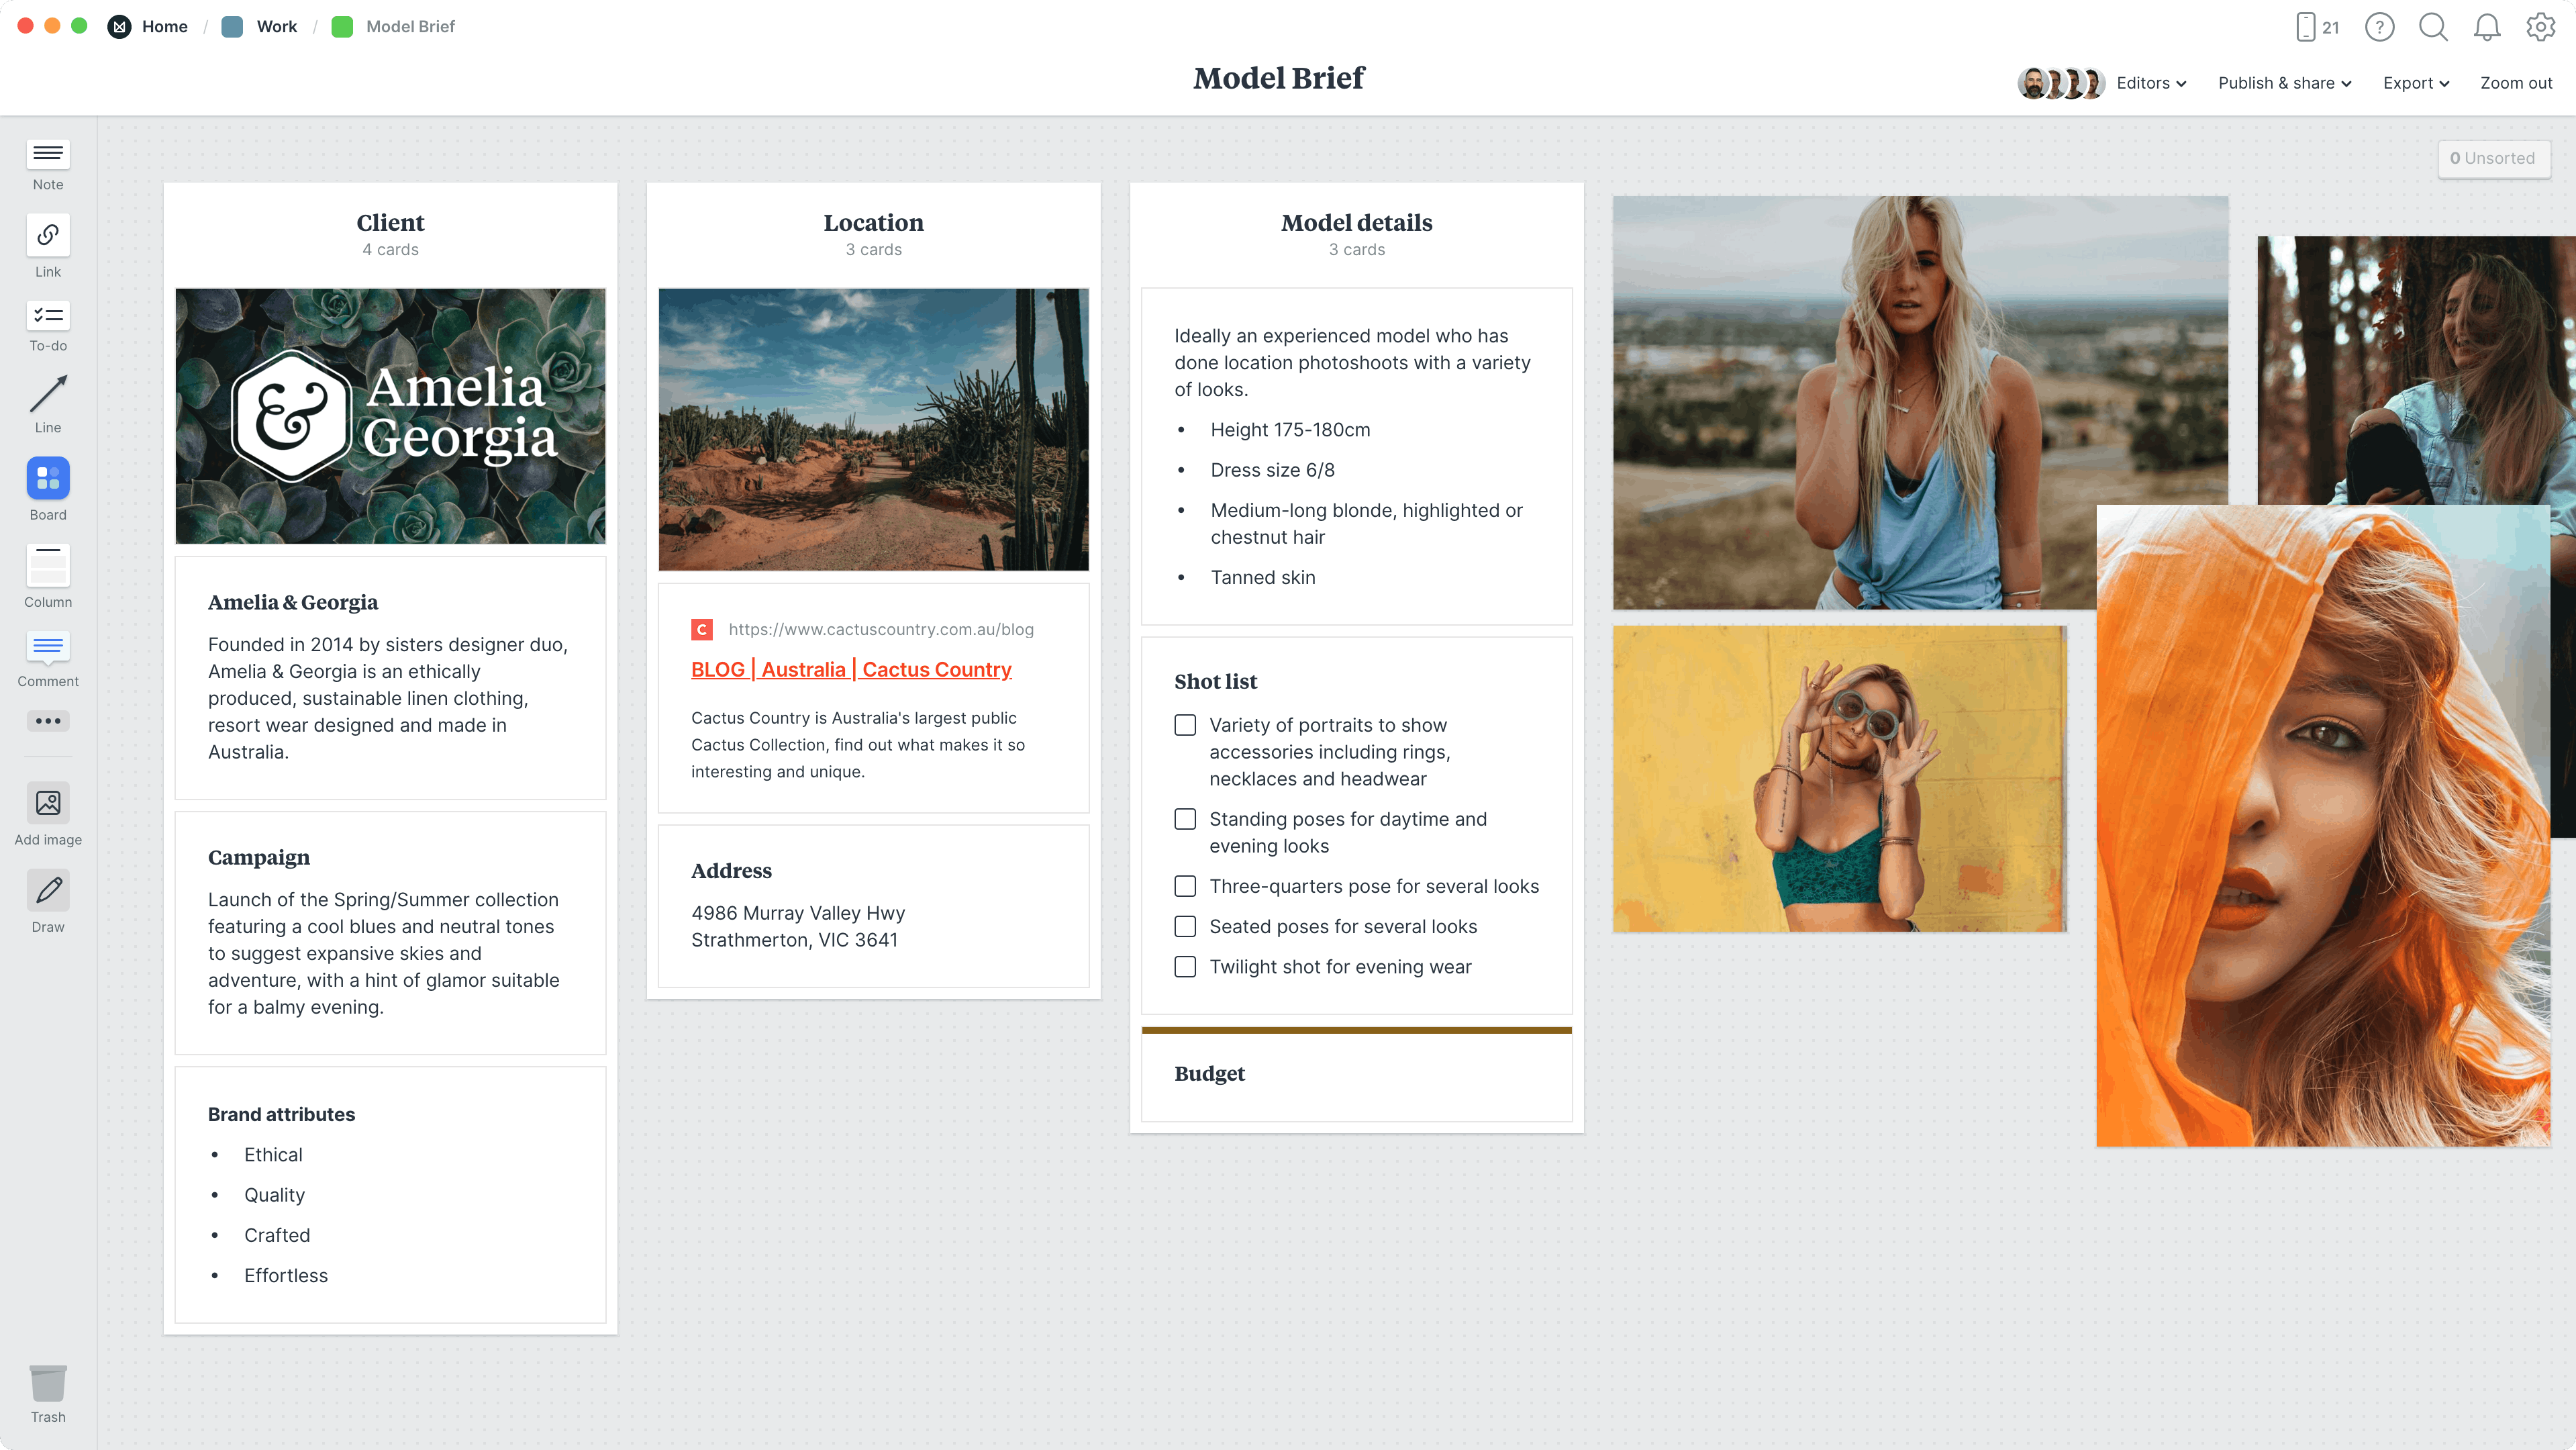 Model Brief Template, within the Milanote app